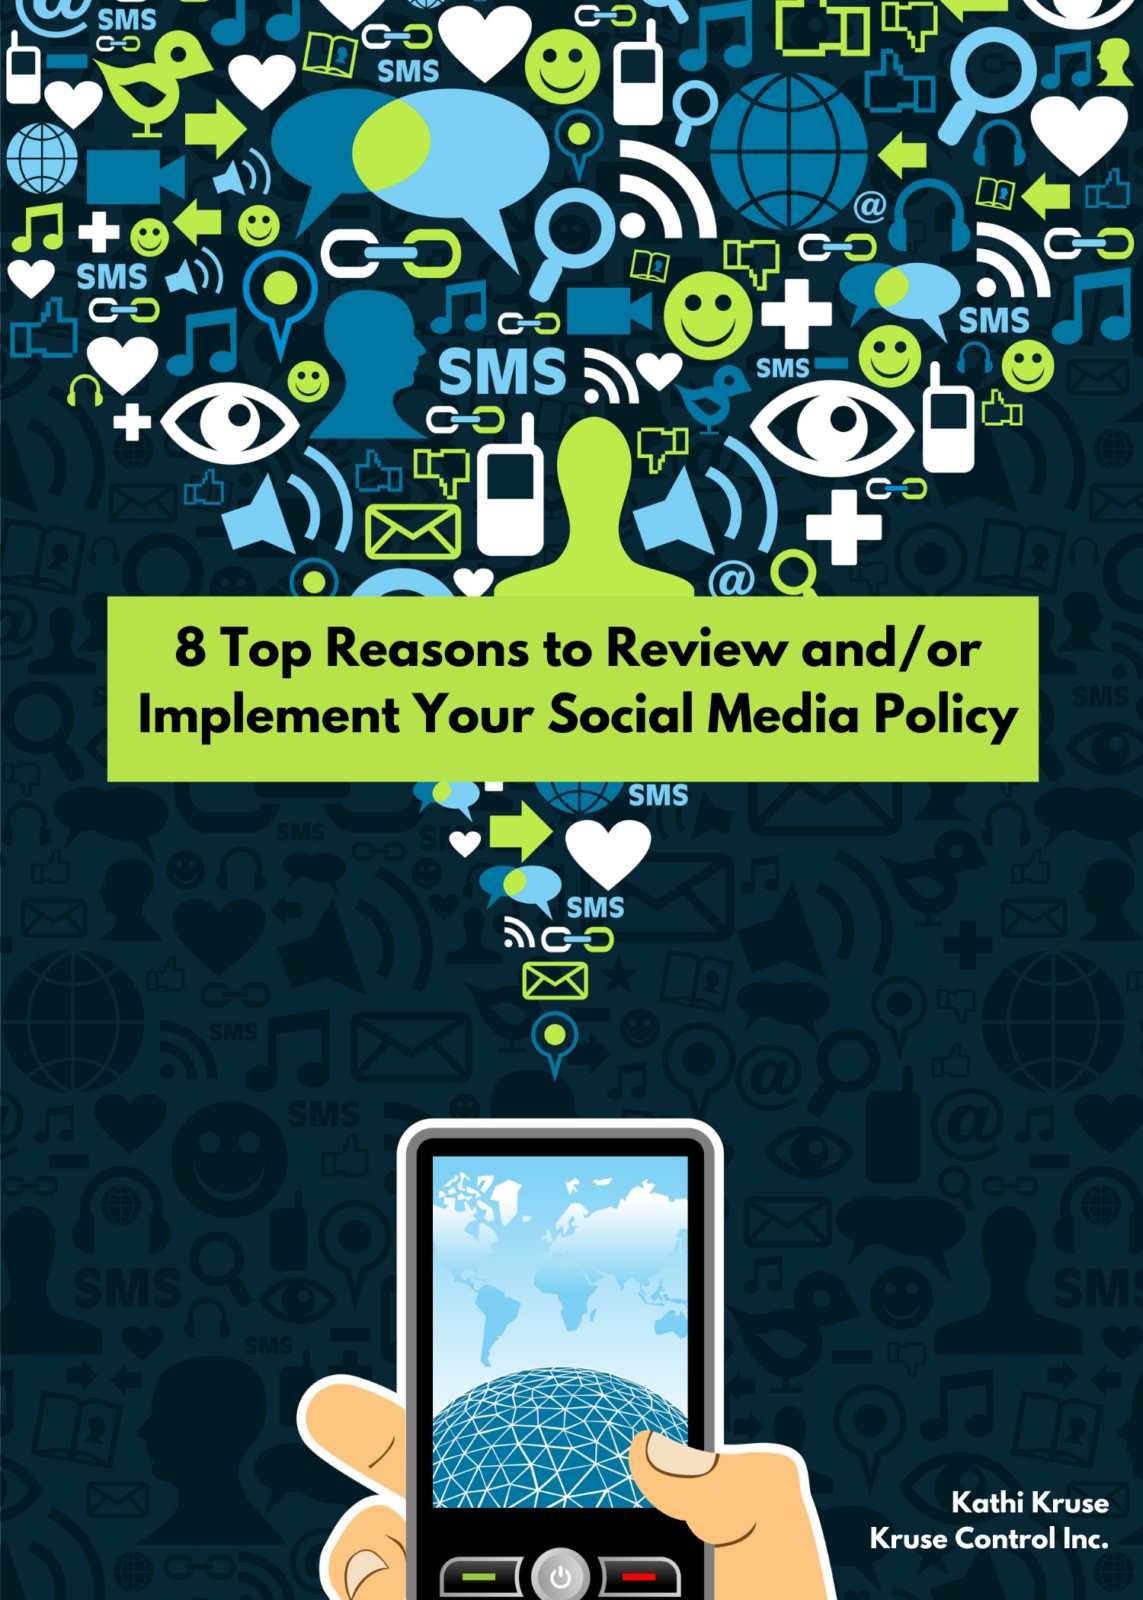 8 Top Reasons to Review Implement a Social Media Policy-1